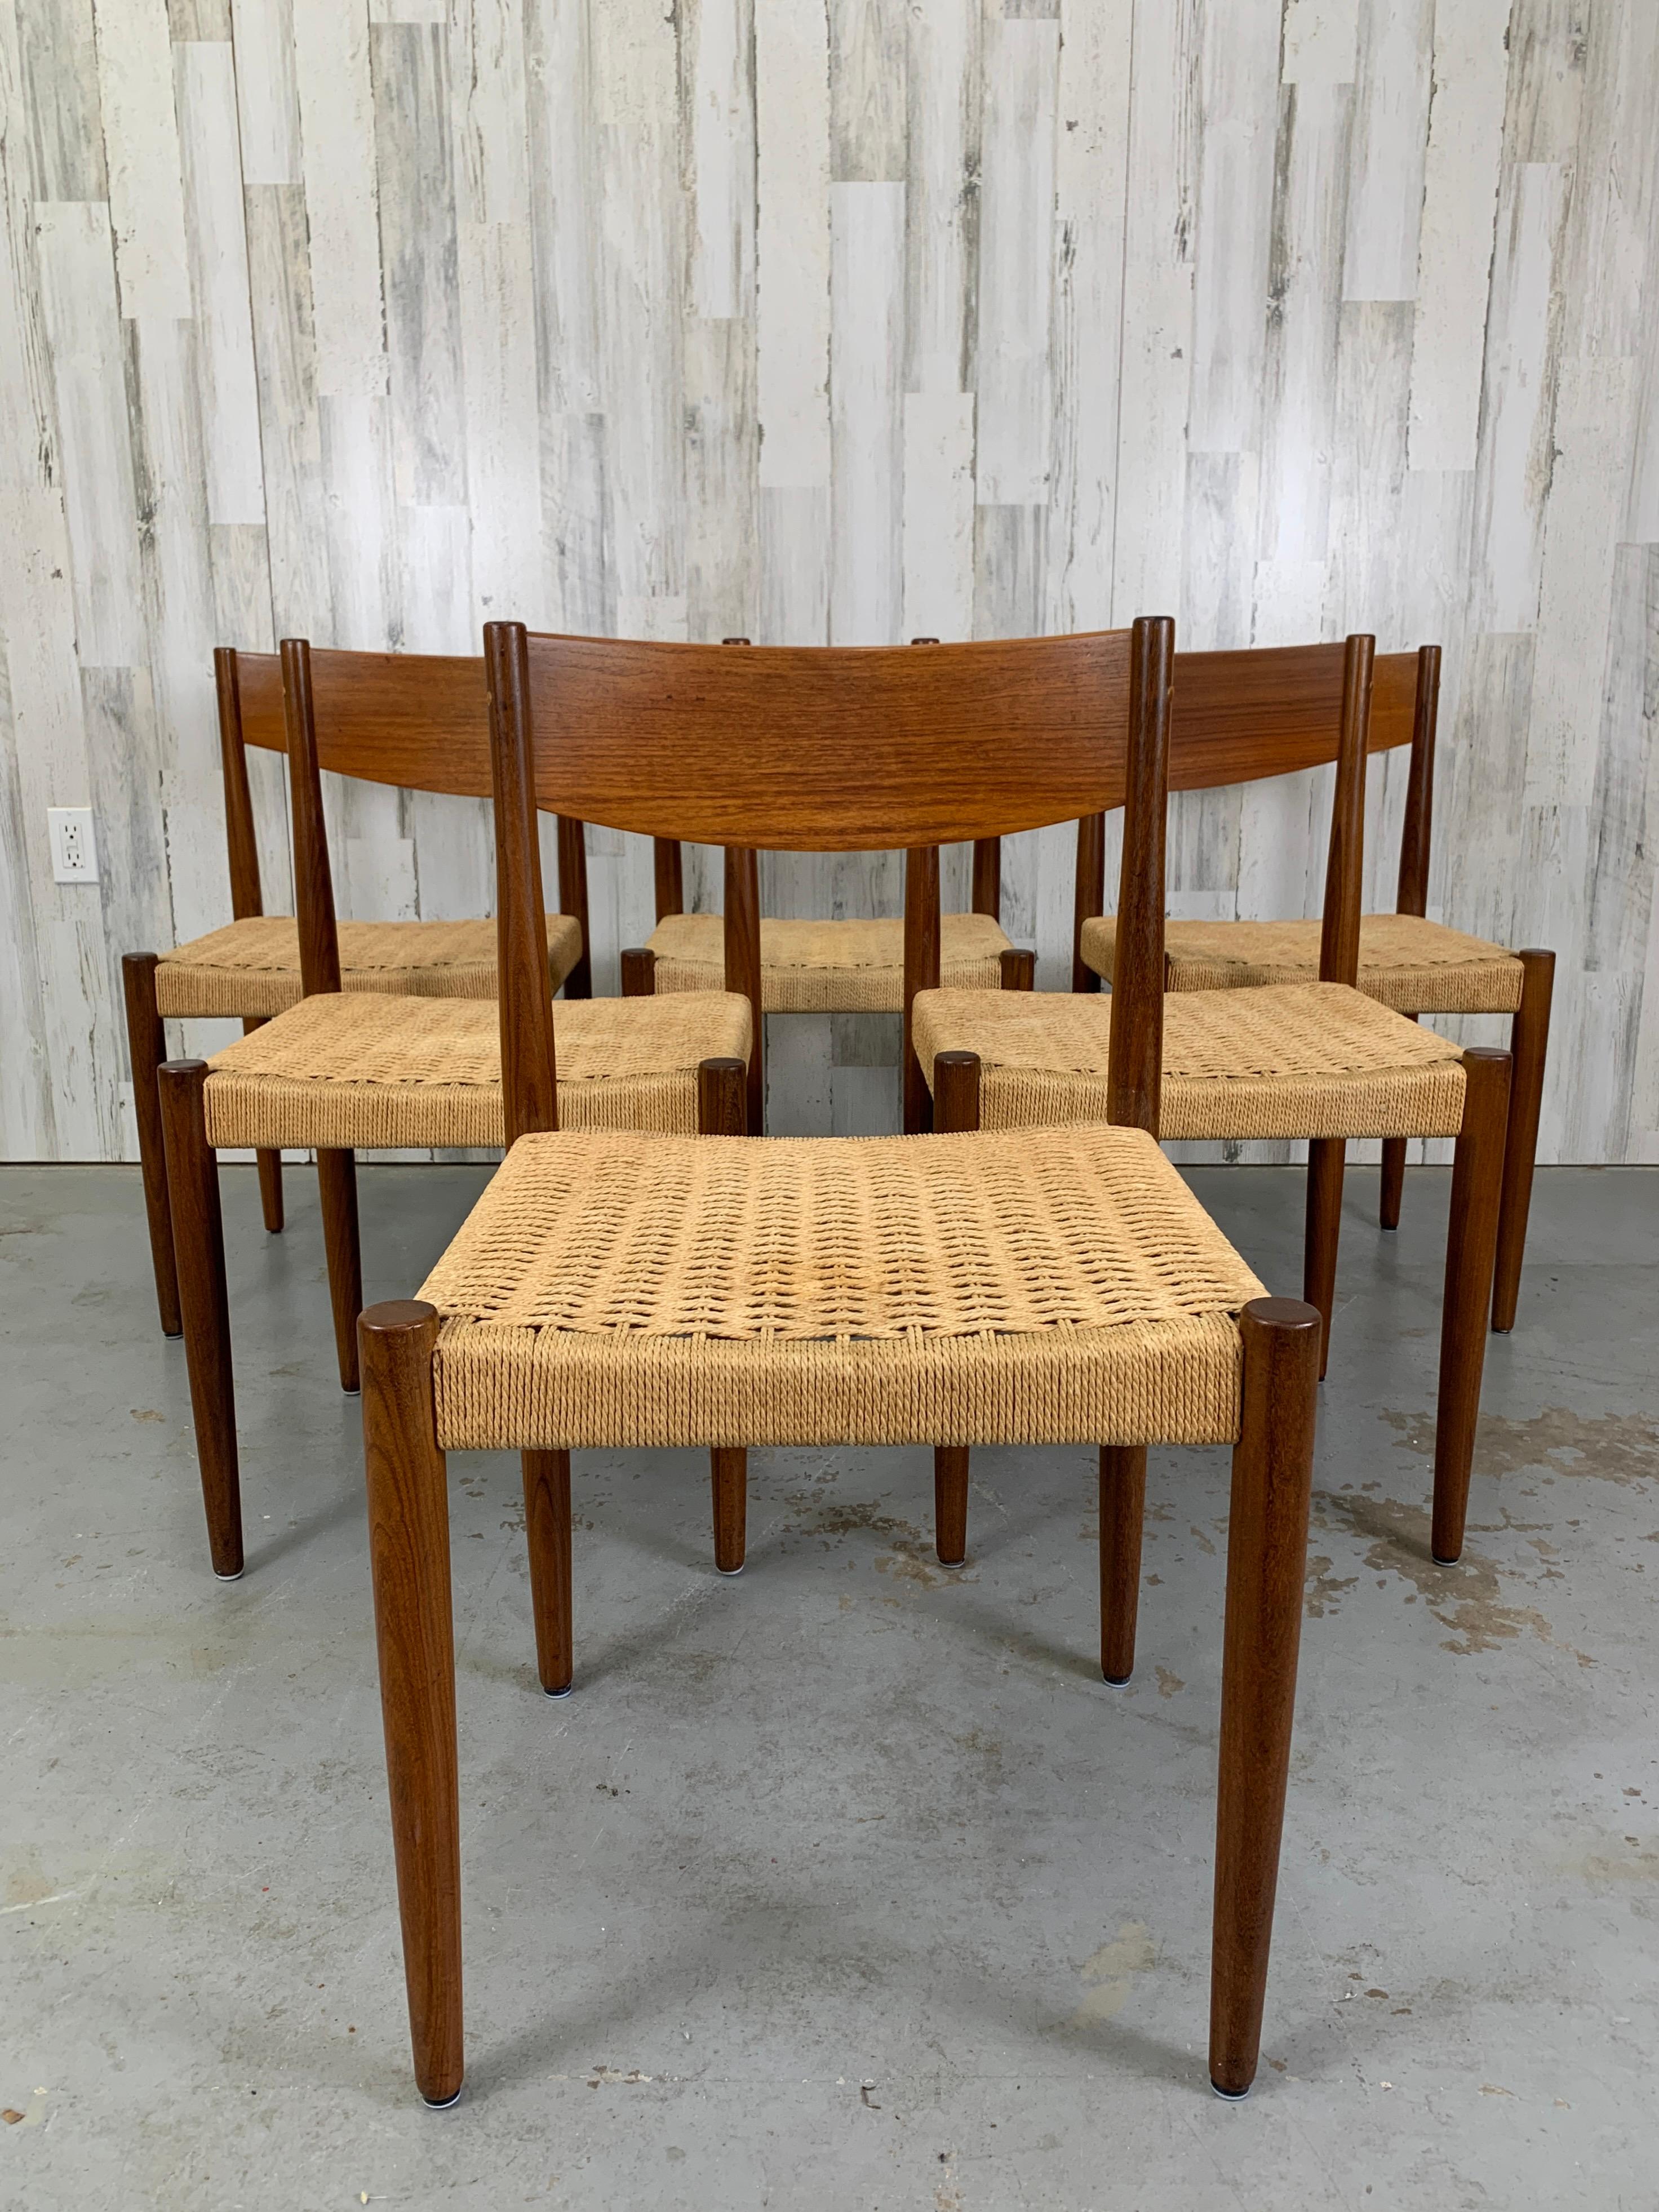 Set of six sculpted Teak with Danish cord seat dining chairs in very well cared for original condition.